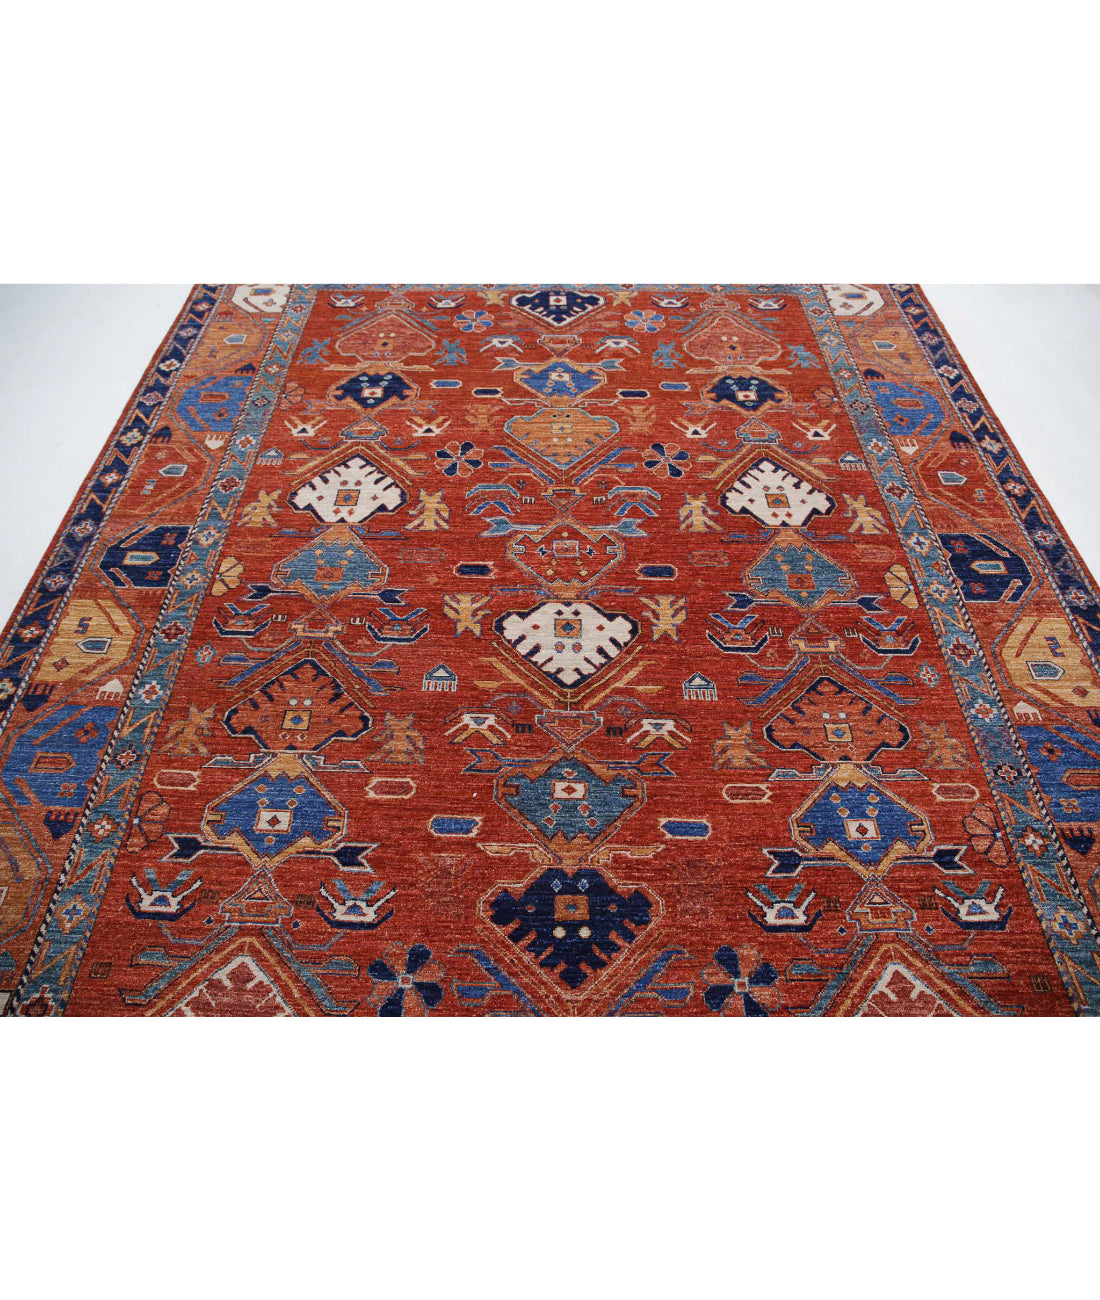 Hand Knotted Nomadic Caucasian Humna Wool Rug - 8'0'' x 10'0'' 8'0'' x 10'0'' (240 X 300) / Rust / Blue